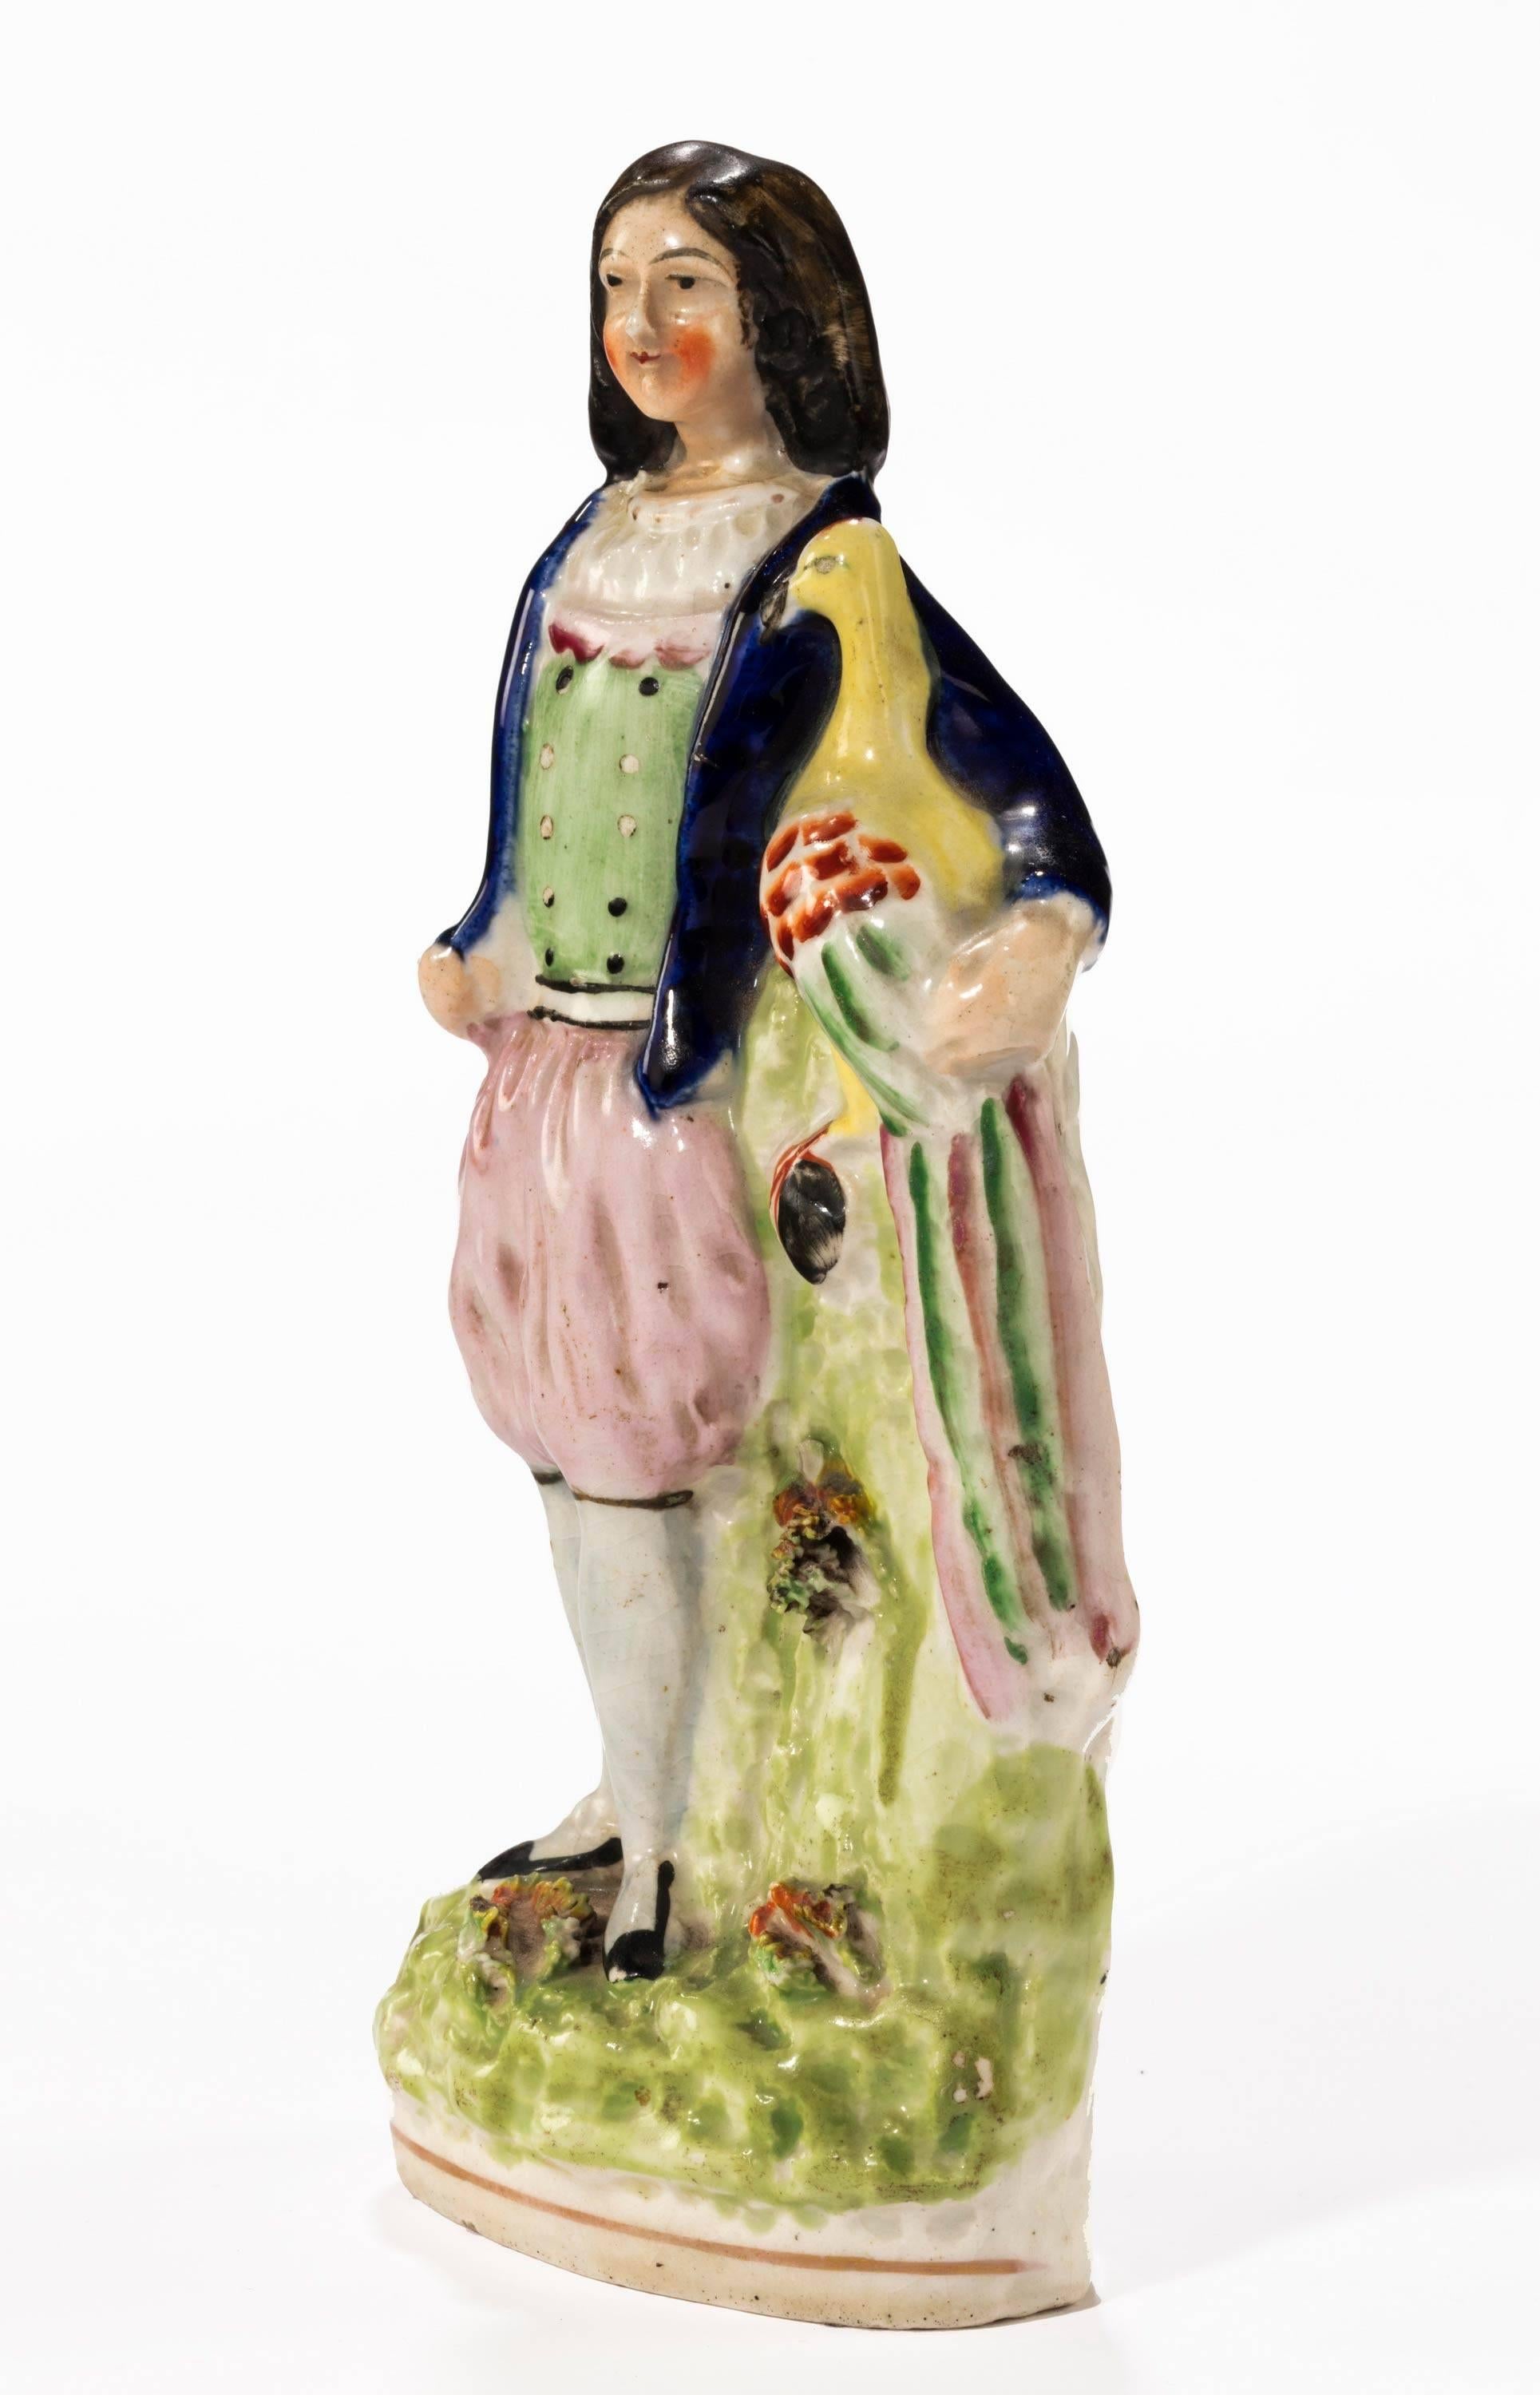 A Staffordshire figure of a young lady holding a peacock.